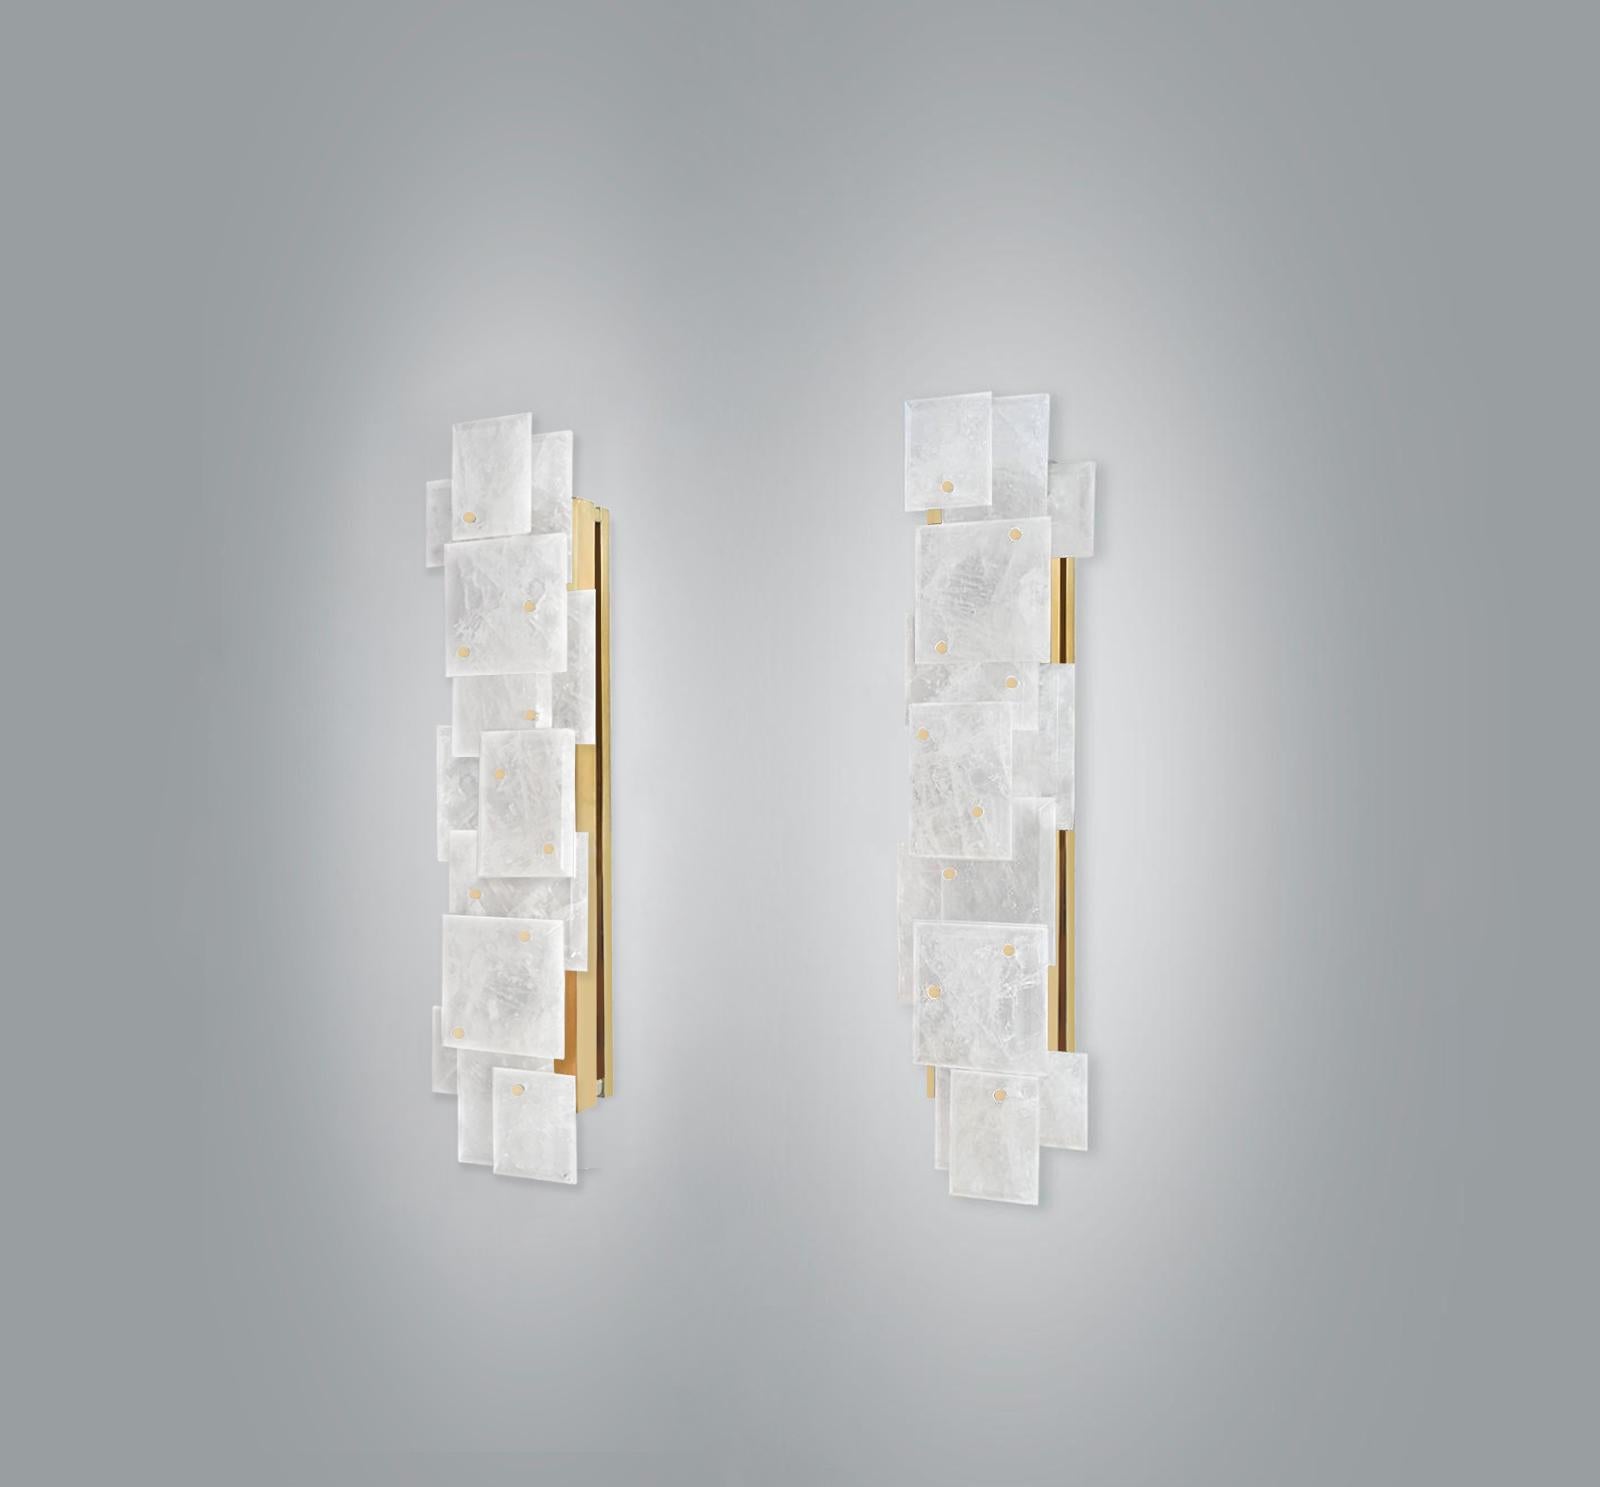 Pair of modern rock crystal quartz sconces with multiple panels decorations in polished brass finish. Created by Phoenix Gallery.
Each sconce installed four sockets, use four 75 watts Led warm light bulbs, 300watts total. Light bulbs supplied.